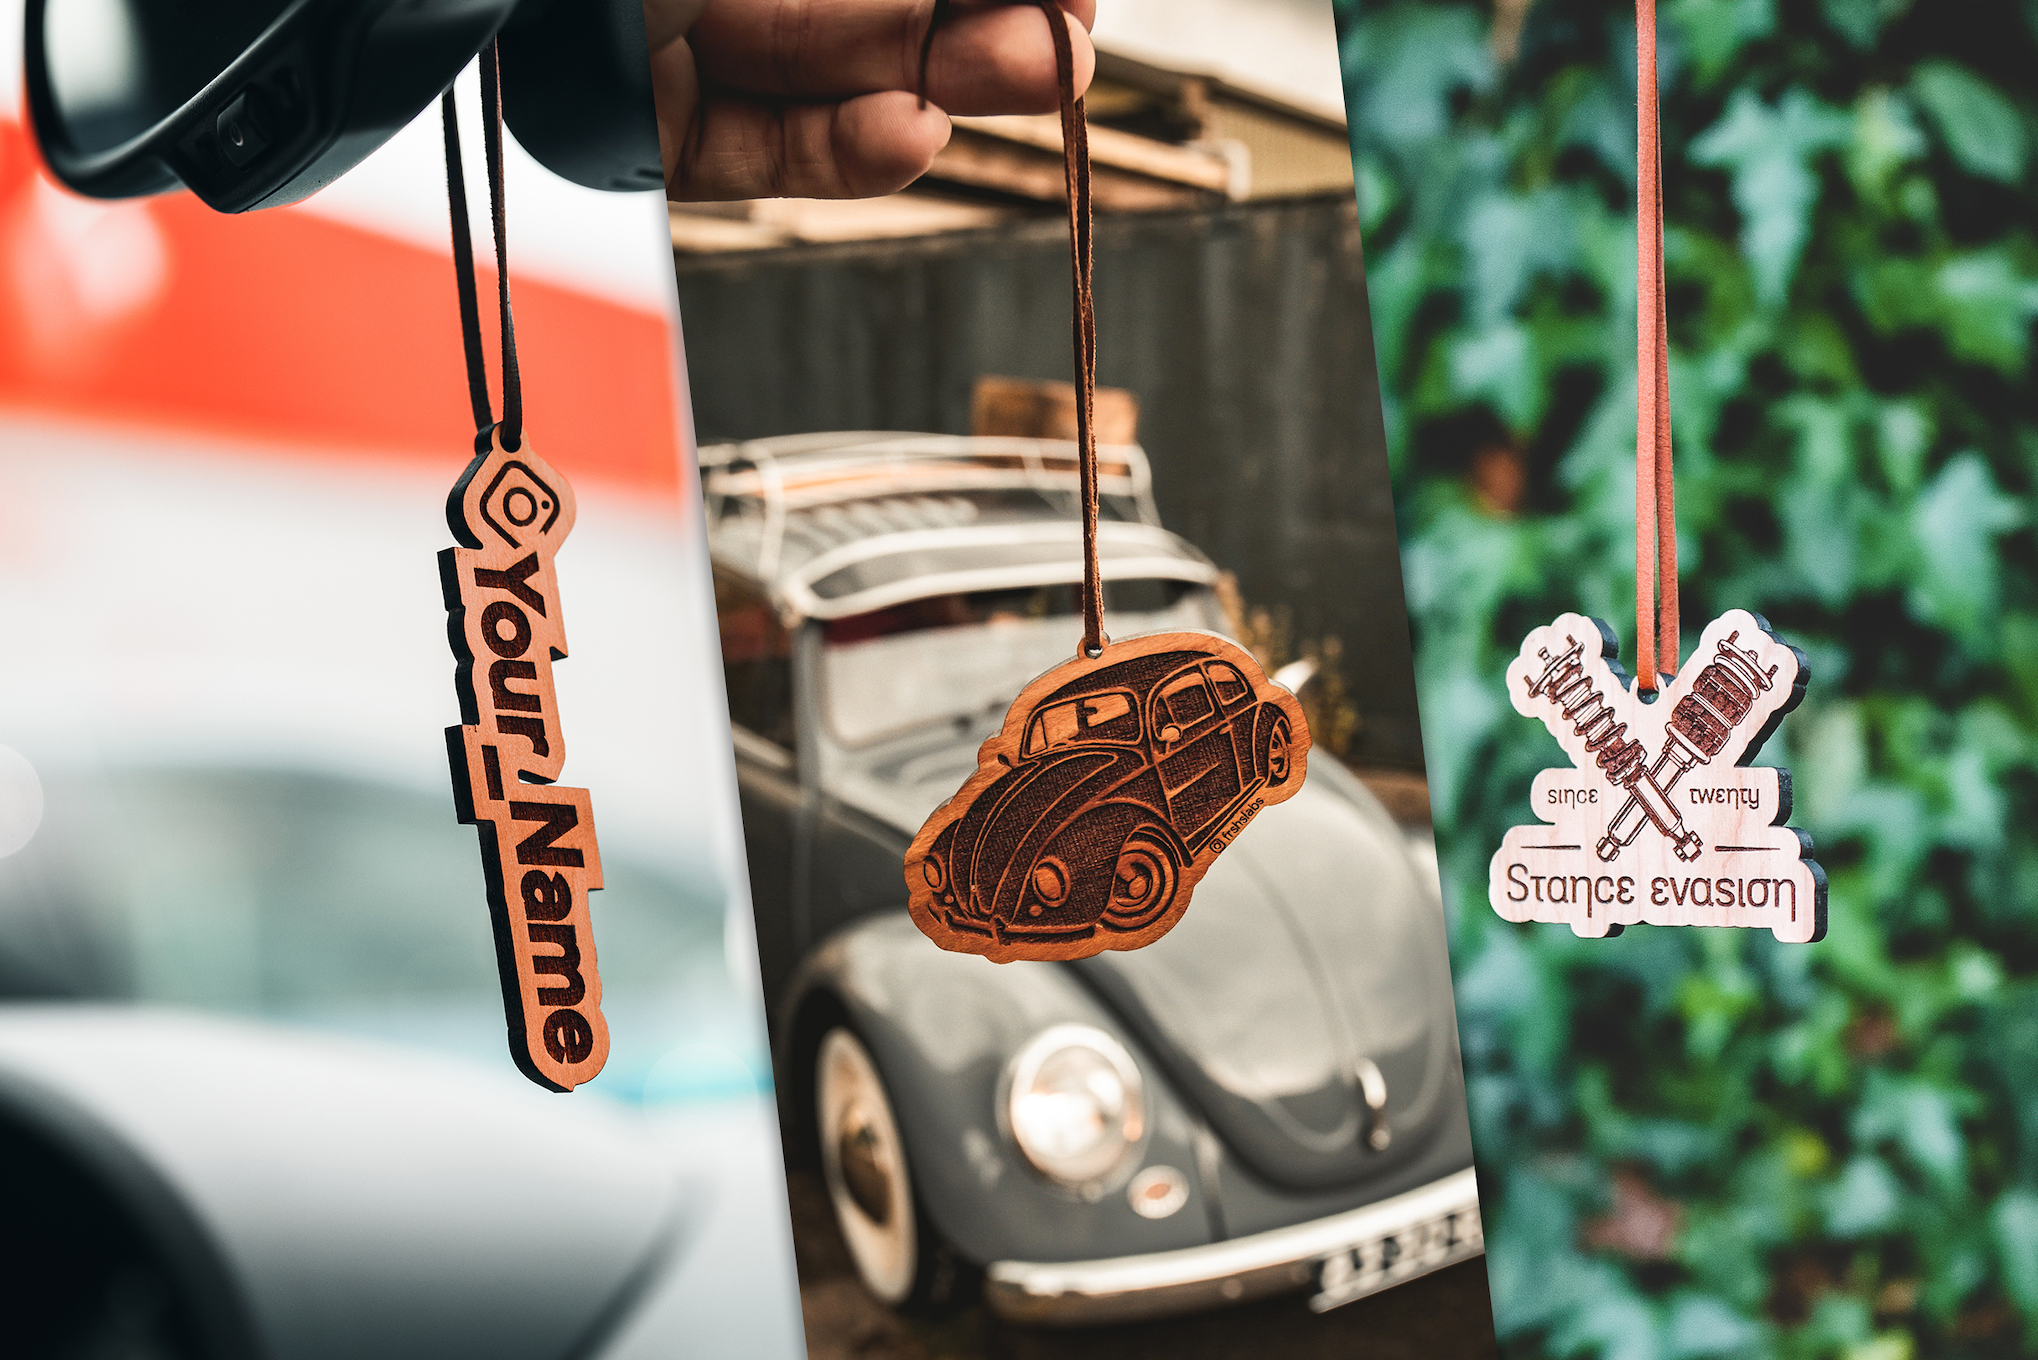 Custom made, re-centable, premium wooden air fresheners by Frshslabs!